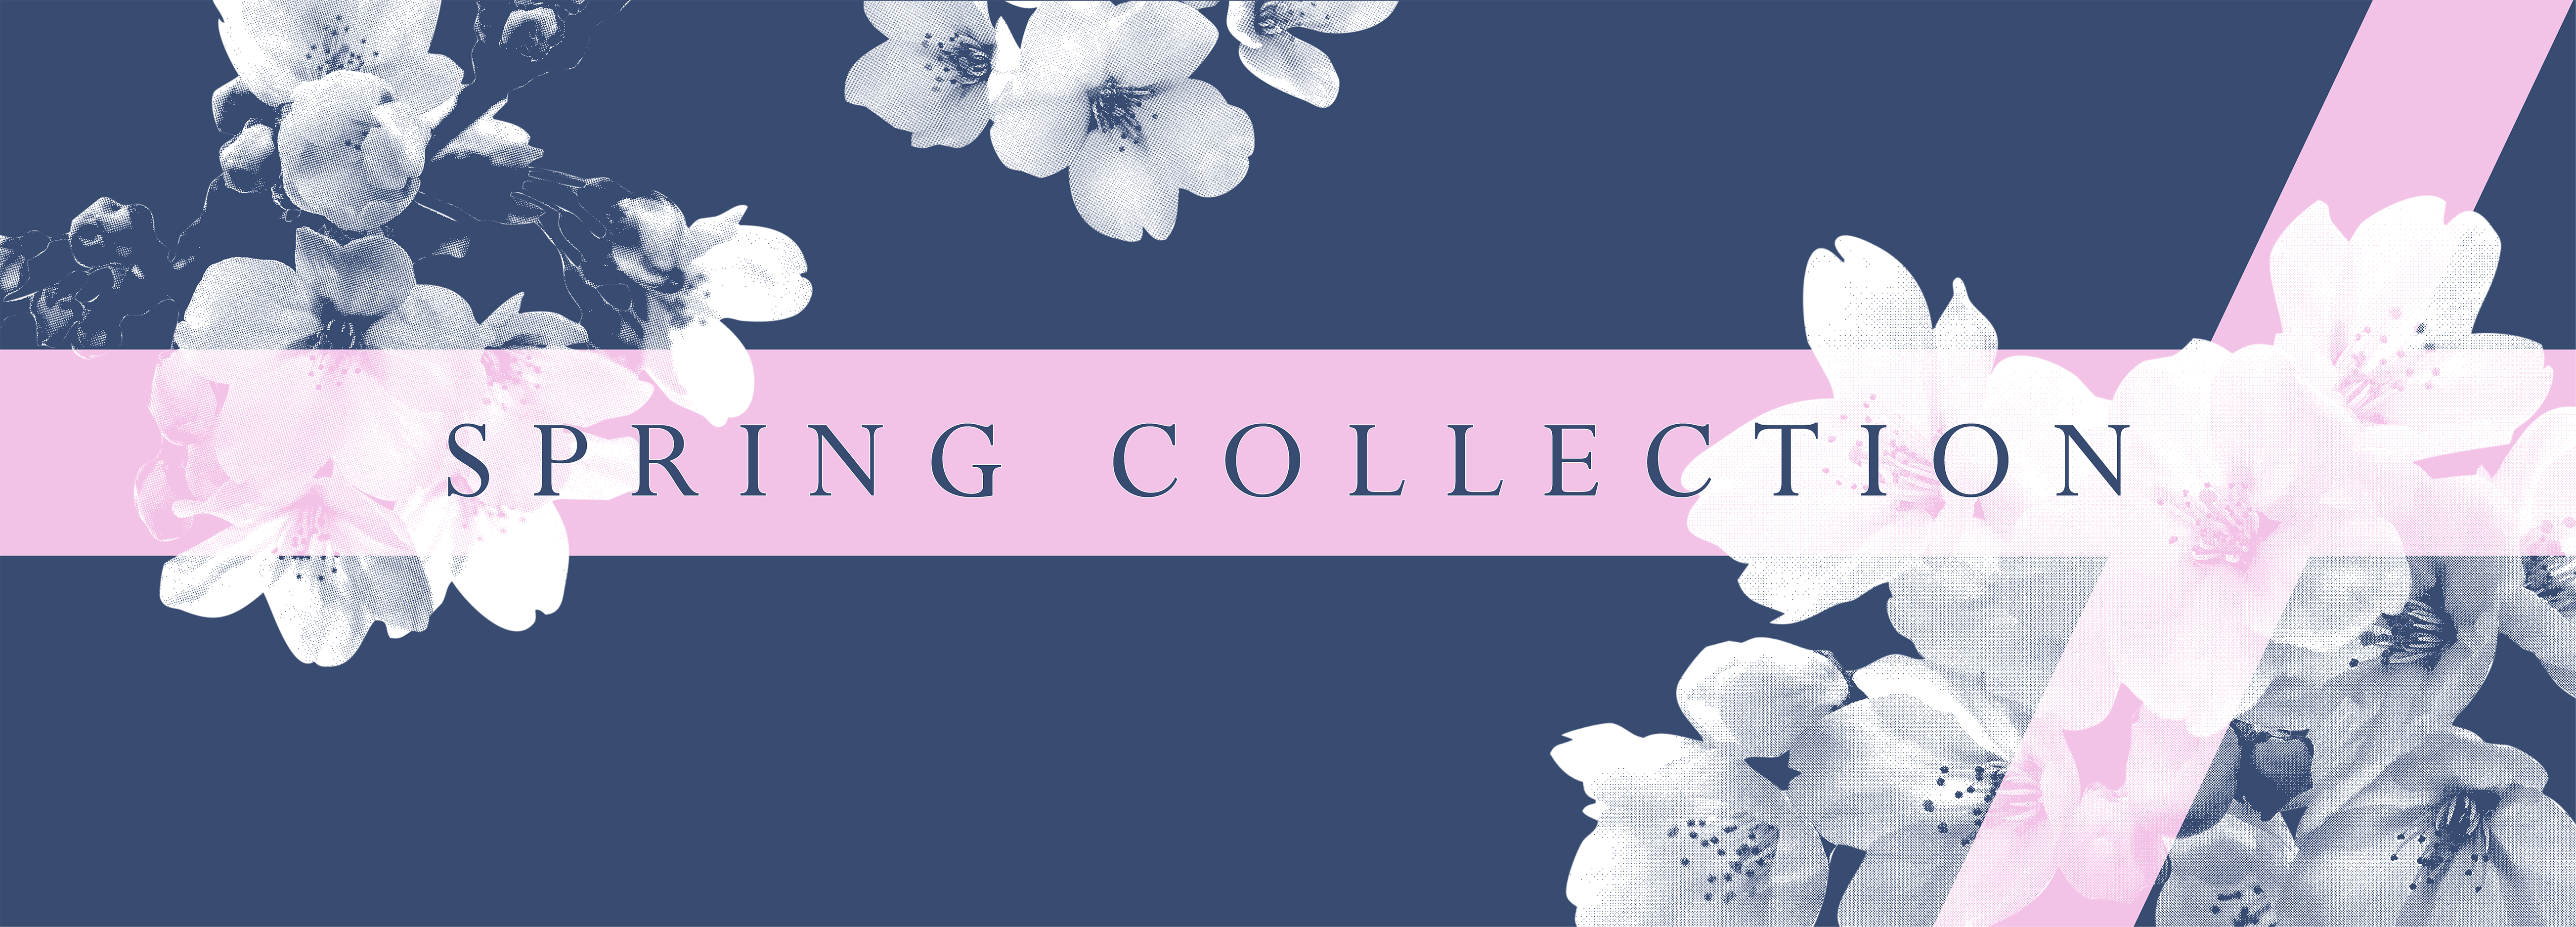 SPRING COLLECTION